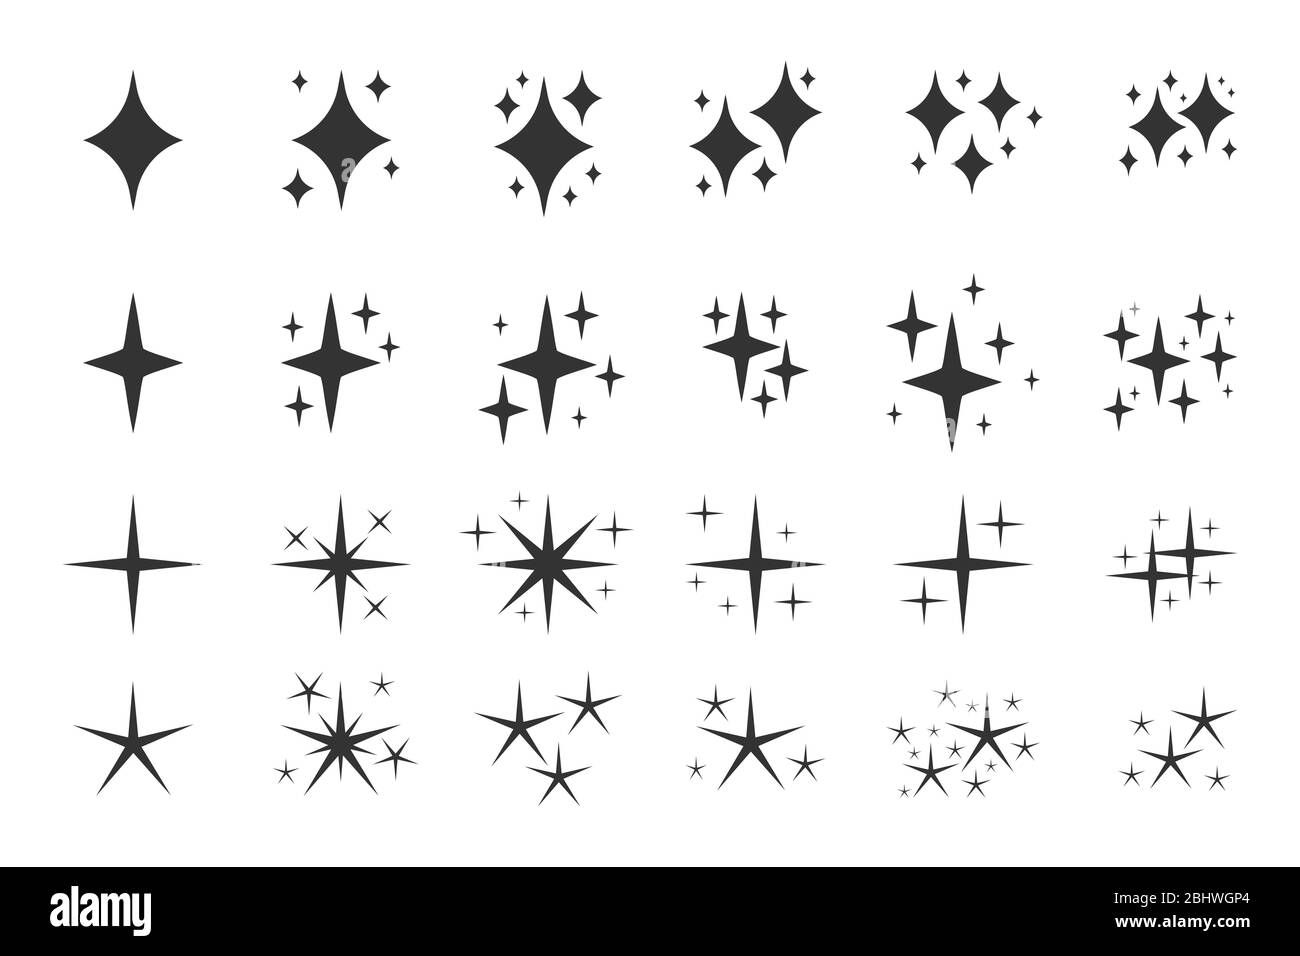 Black sparkles symbols icon set. Glyph template spark for glowing light effect stars, bursts. Silhouette symbol shine, clean, confetti element. Elegant twinkle shape. Isolated vector illustration Stock Vector